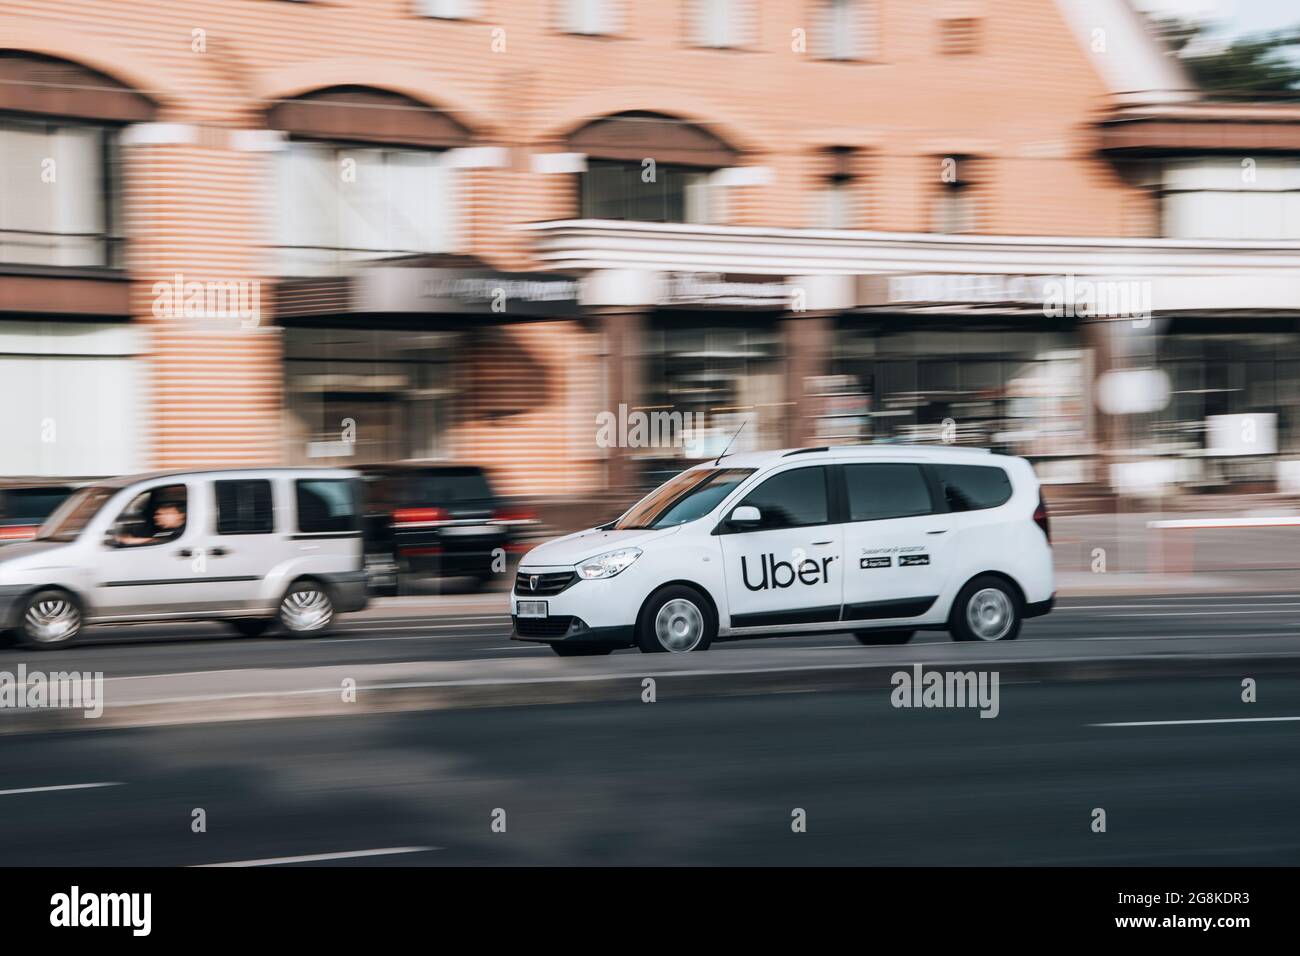 Ukraine, Kyiv - 16 July 2021: White Renault Dokker Taxi Uber car moving on the street. Editorial Stock Photo